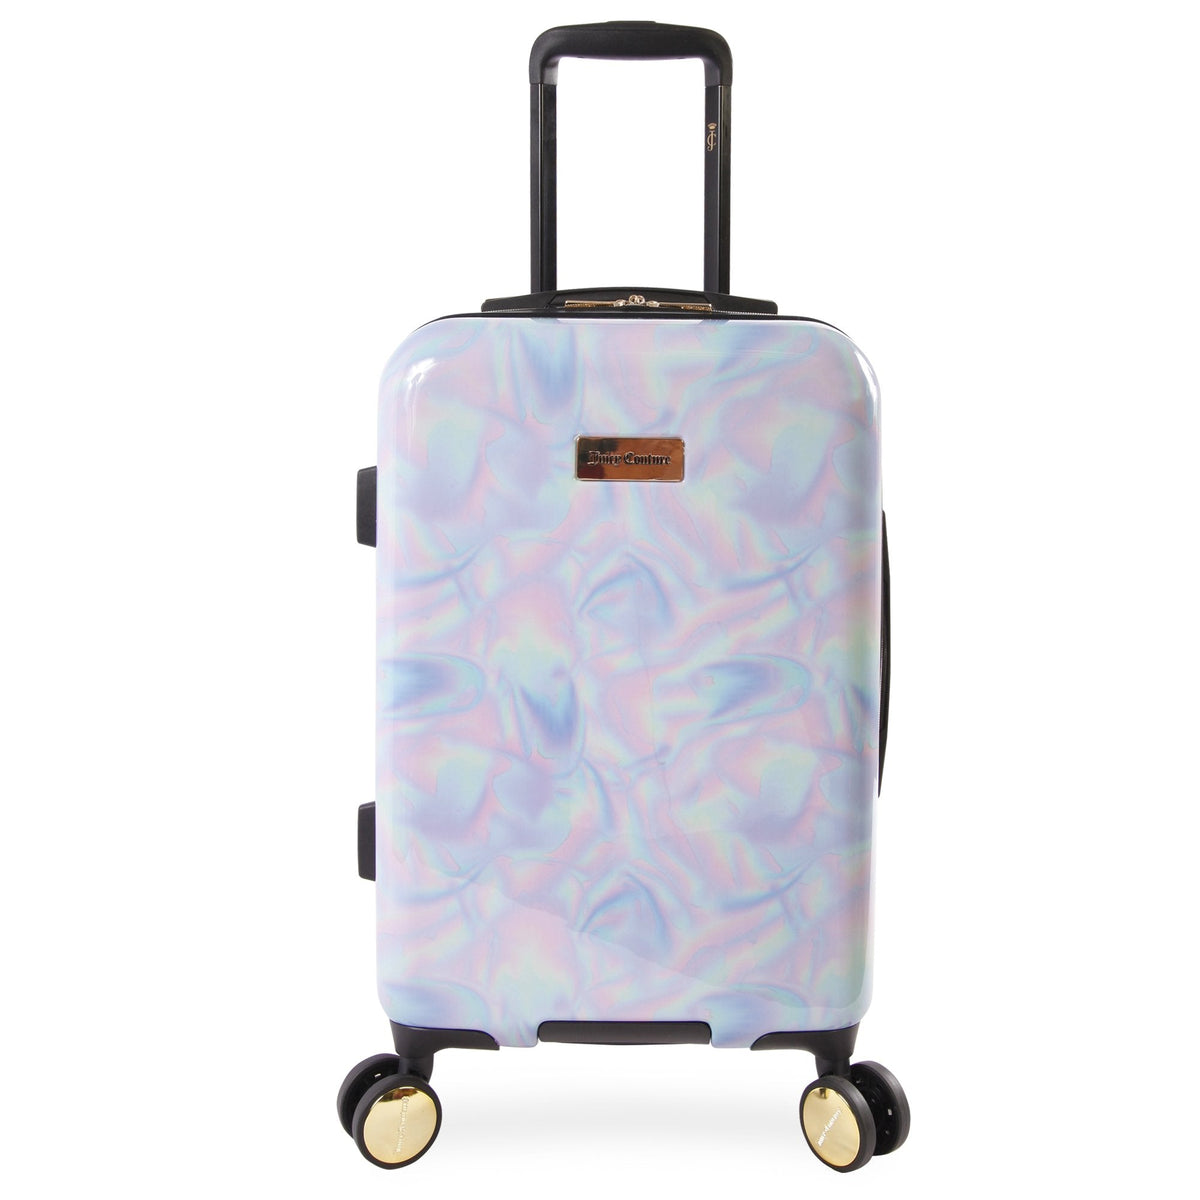 Juicy Couture Carry-On Hardside Spinner Luggage Holographic